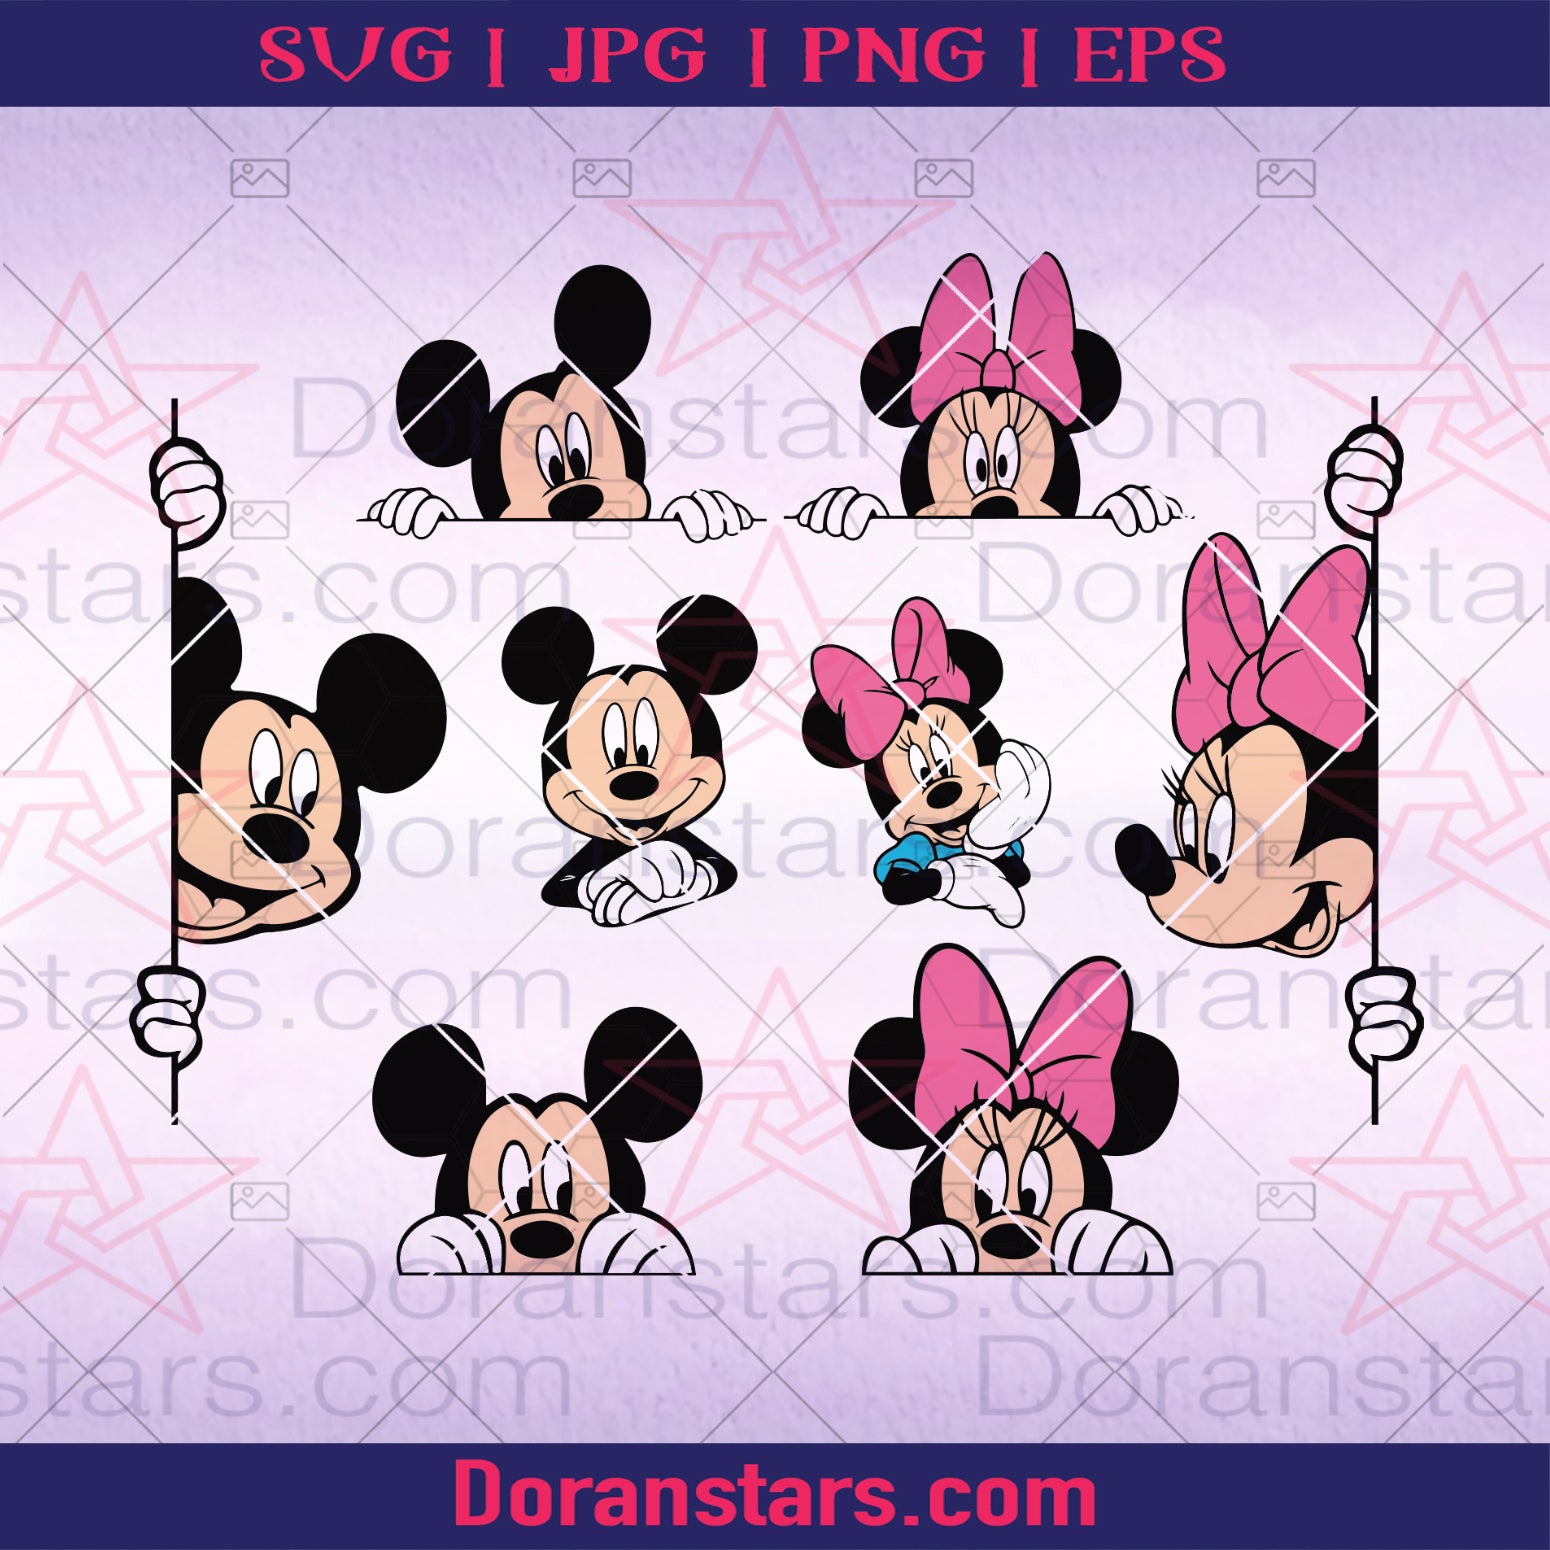 Mickey Mouse SVG cut file at